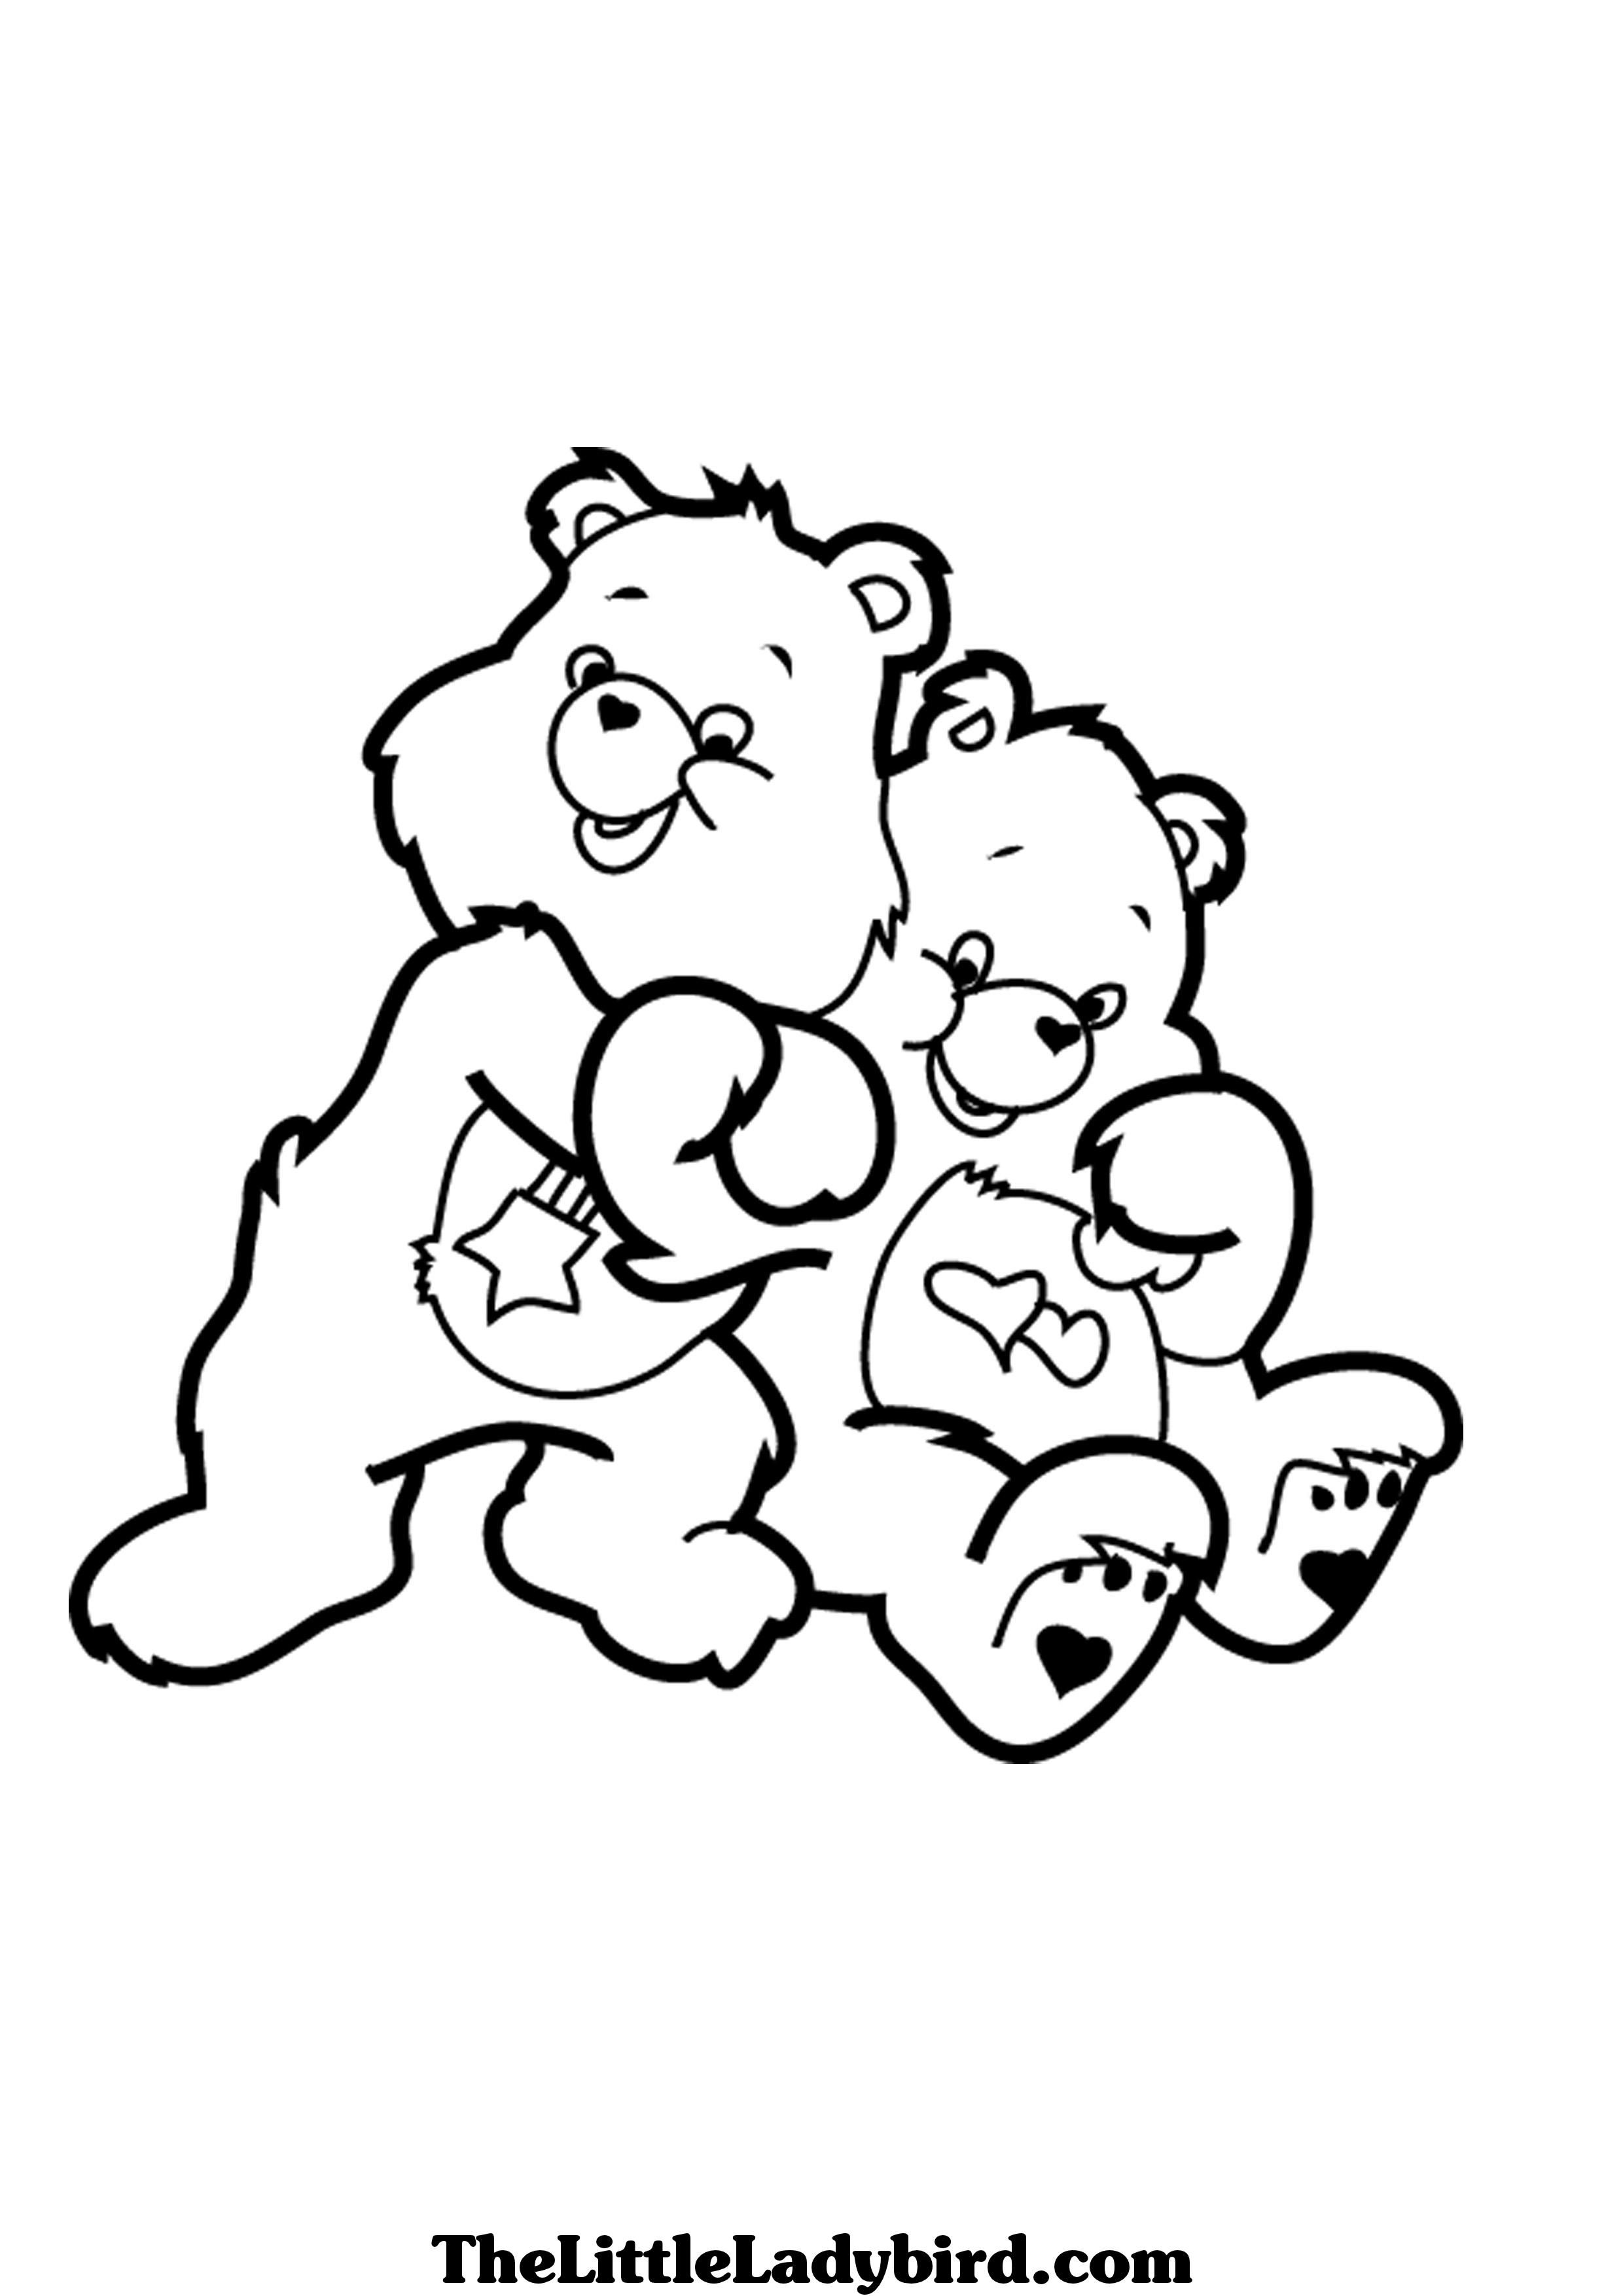 Care Bears Love a Lot Hugs Coloring printable page | Teddy bear coloring  pages, Bear coloring pages, Coloring pages